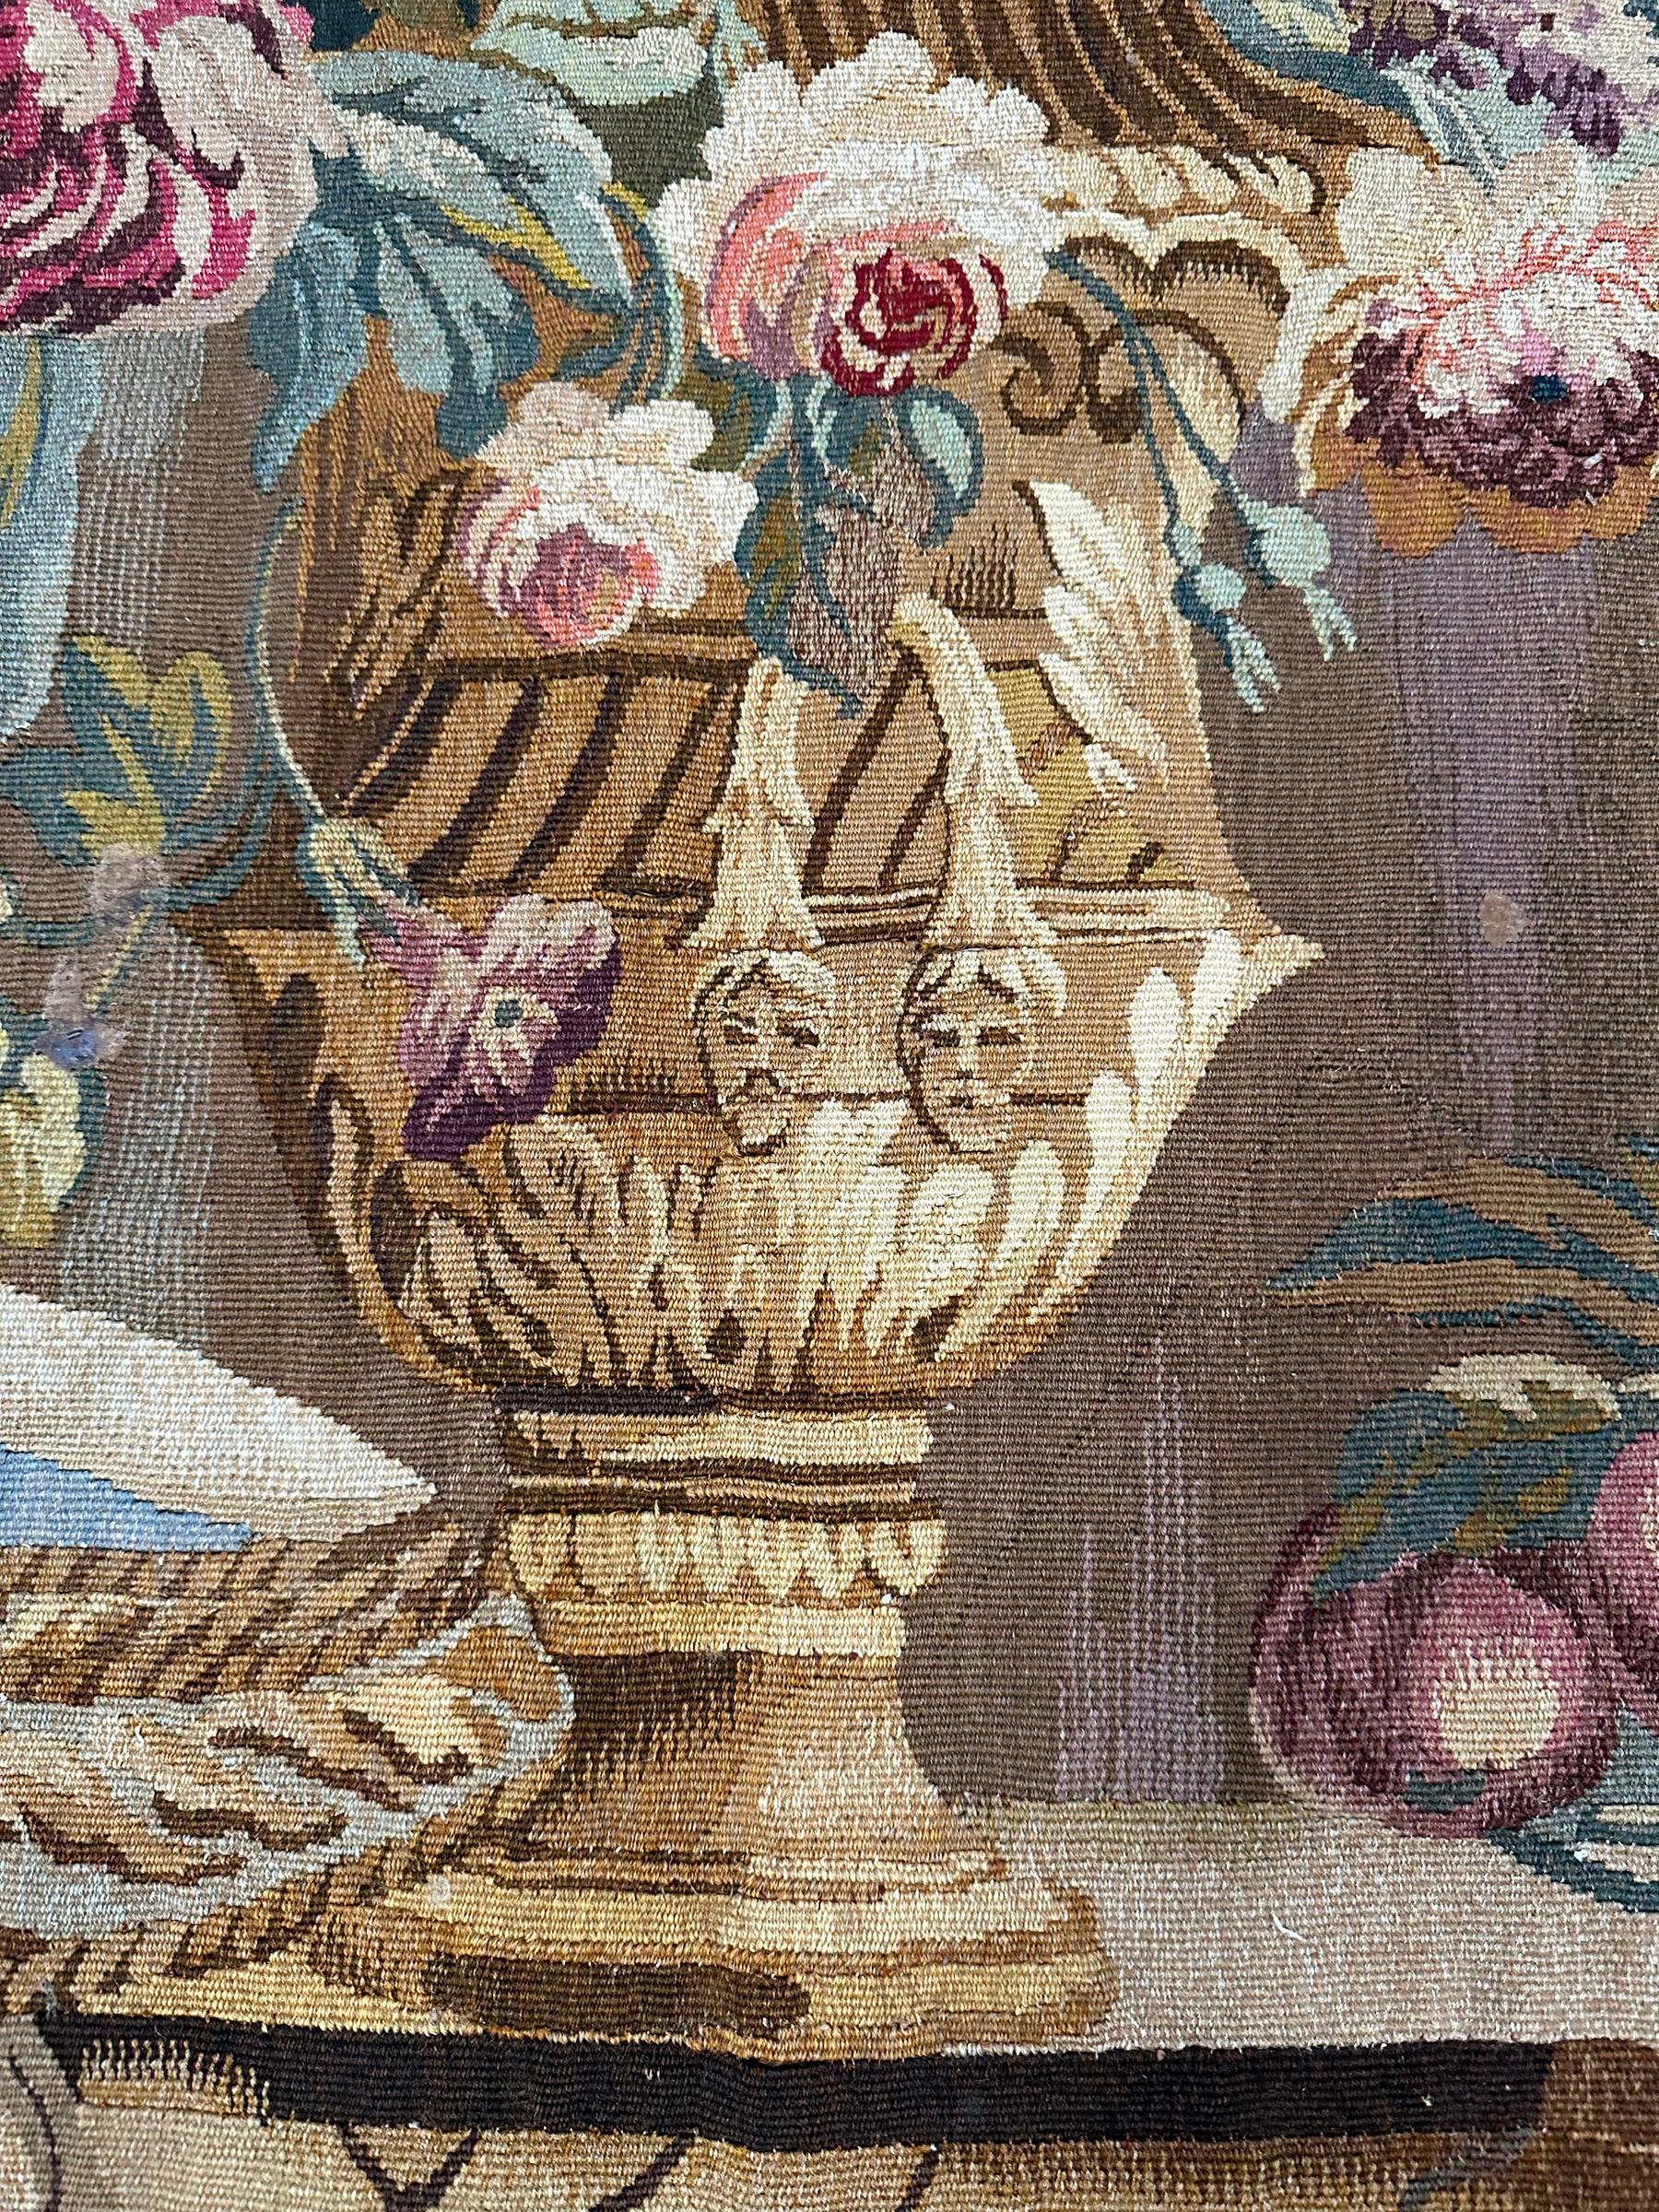 Hand-Woven Antique French Tapestry Wool & Silk Masque Vase Exotic Flowers 4x5 122x 142cm For Sale